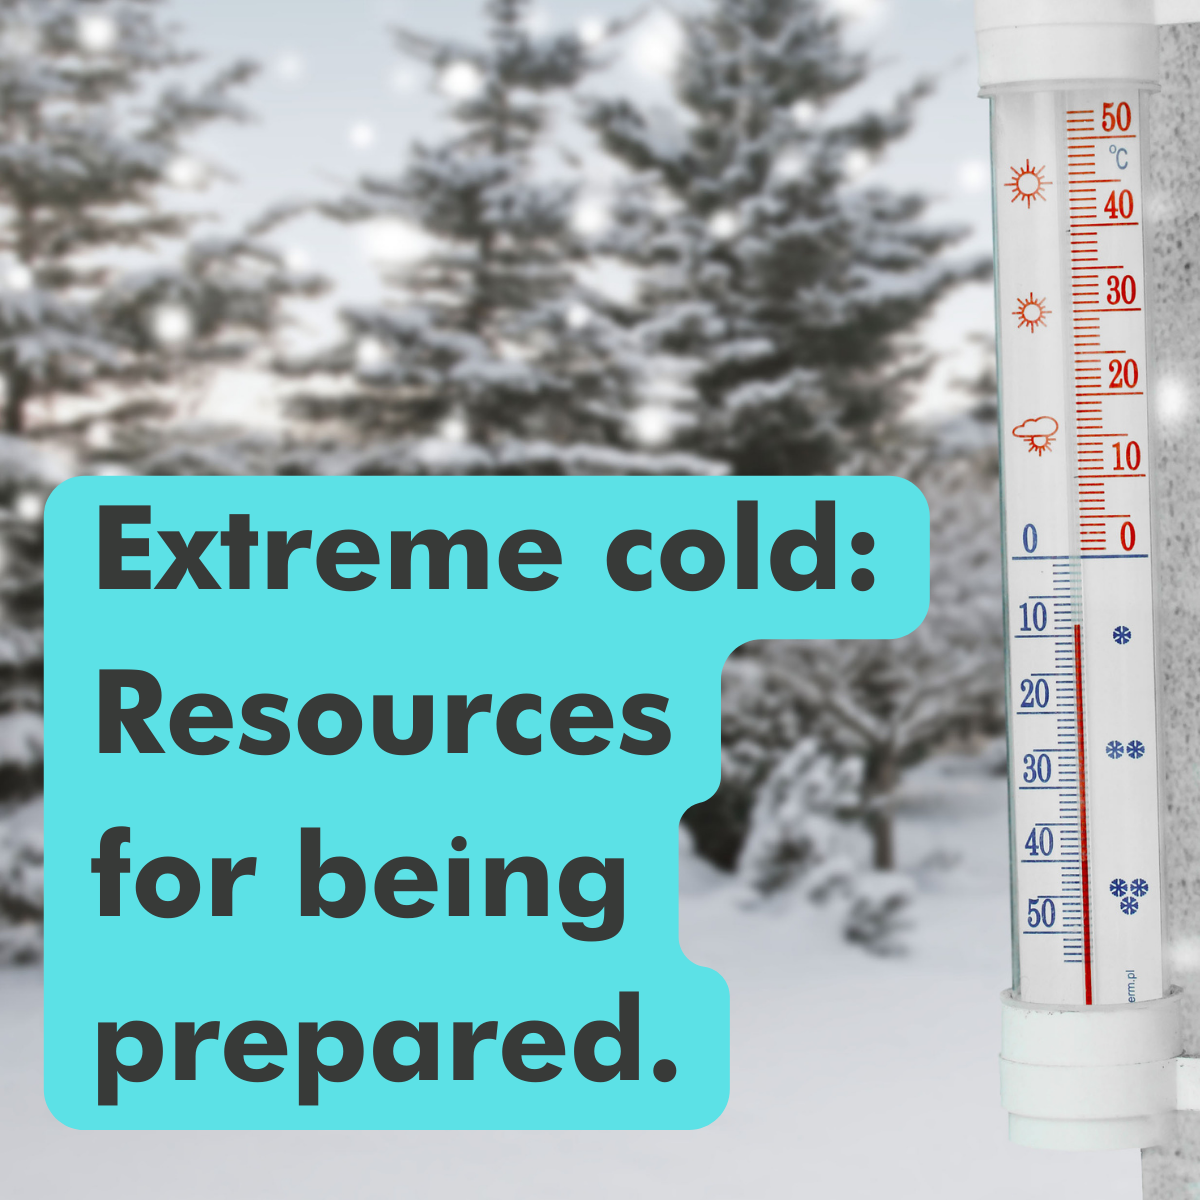 Extreme cold resources tile